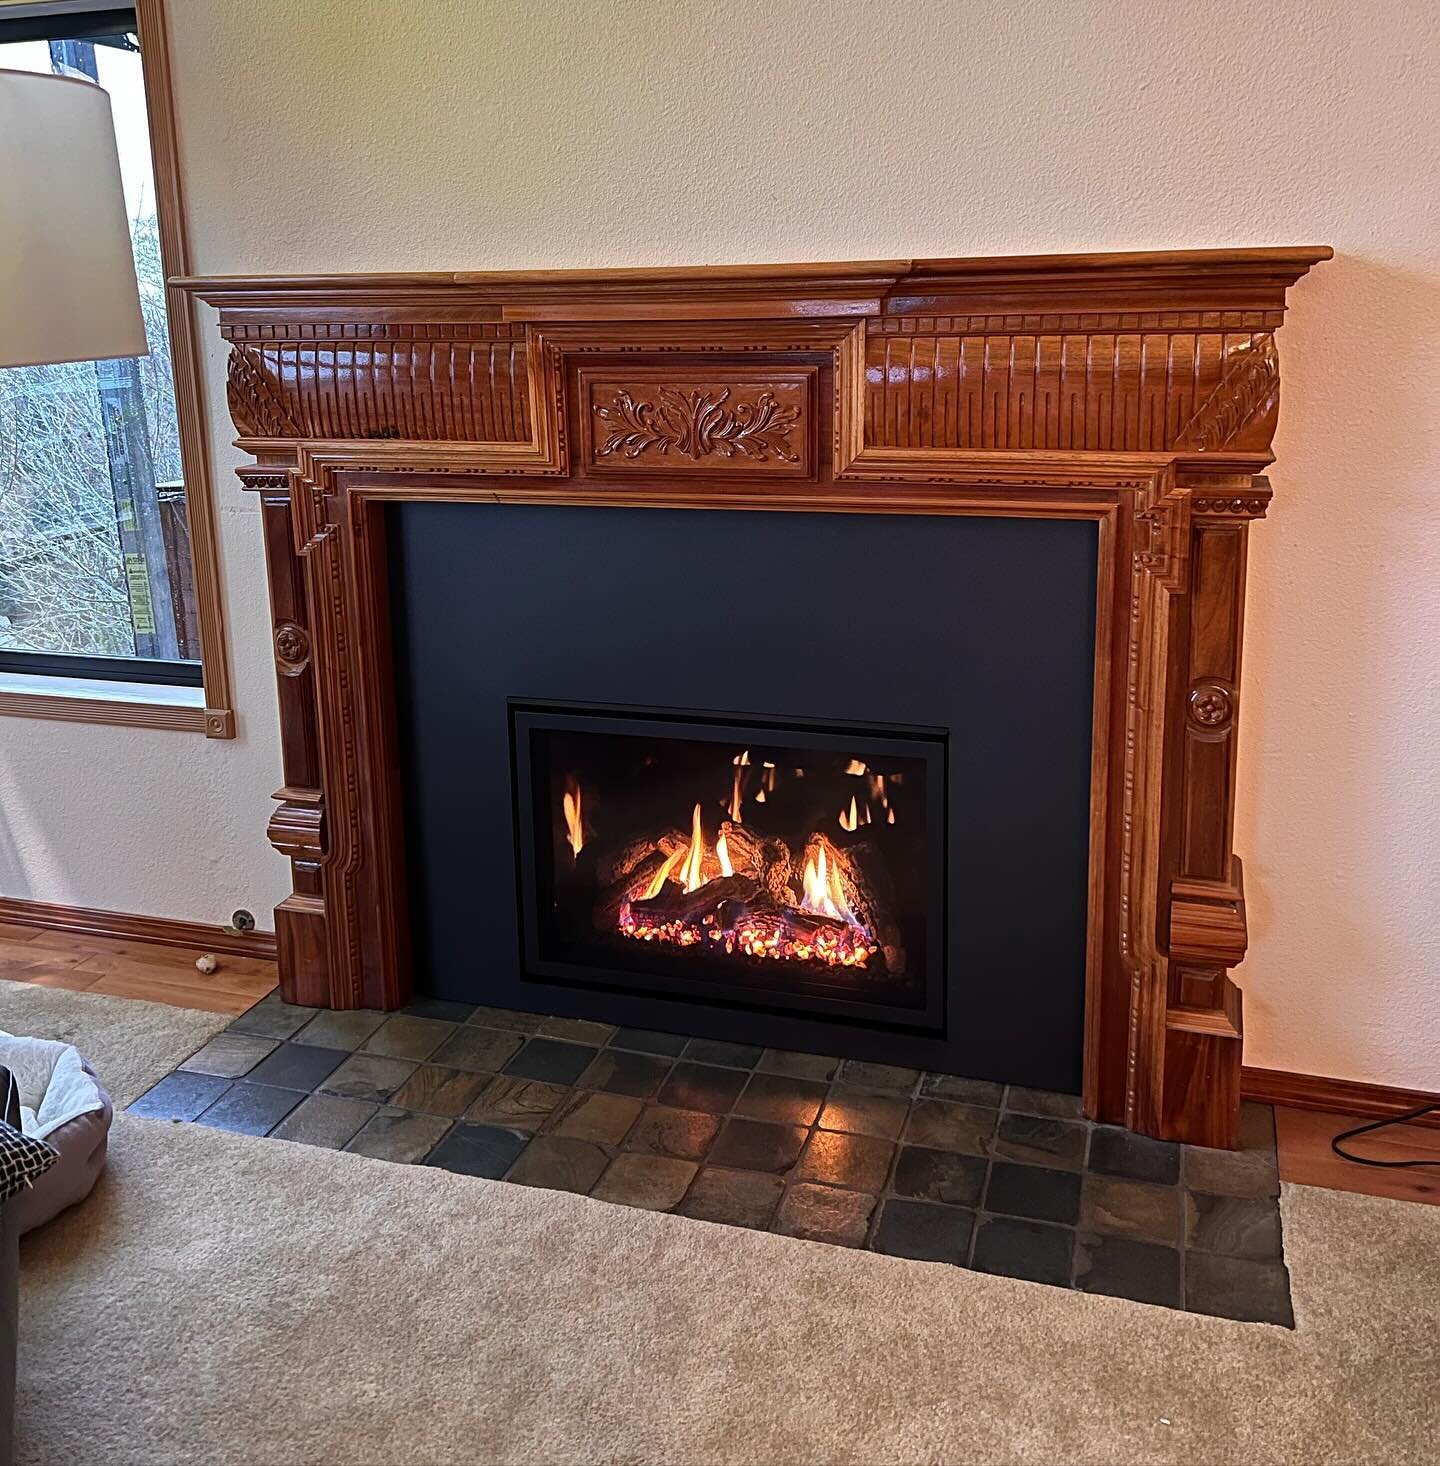 @archgardfireplaces Chantico 36 w/ Reflective Glass Firebox Panels and Huge Custom Surround

#remodel #fireplacemakeover #gasinsert #fireplace